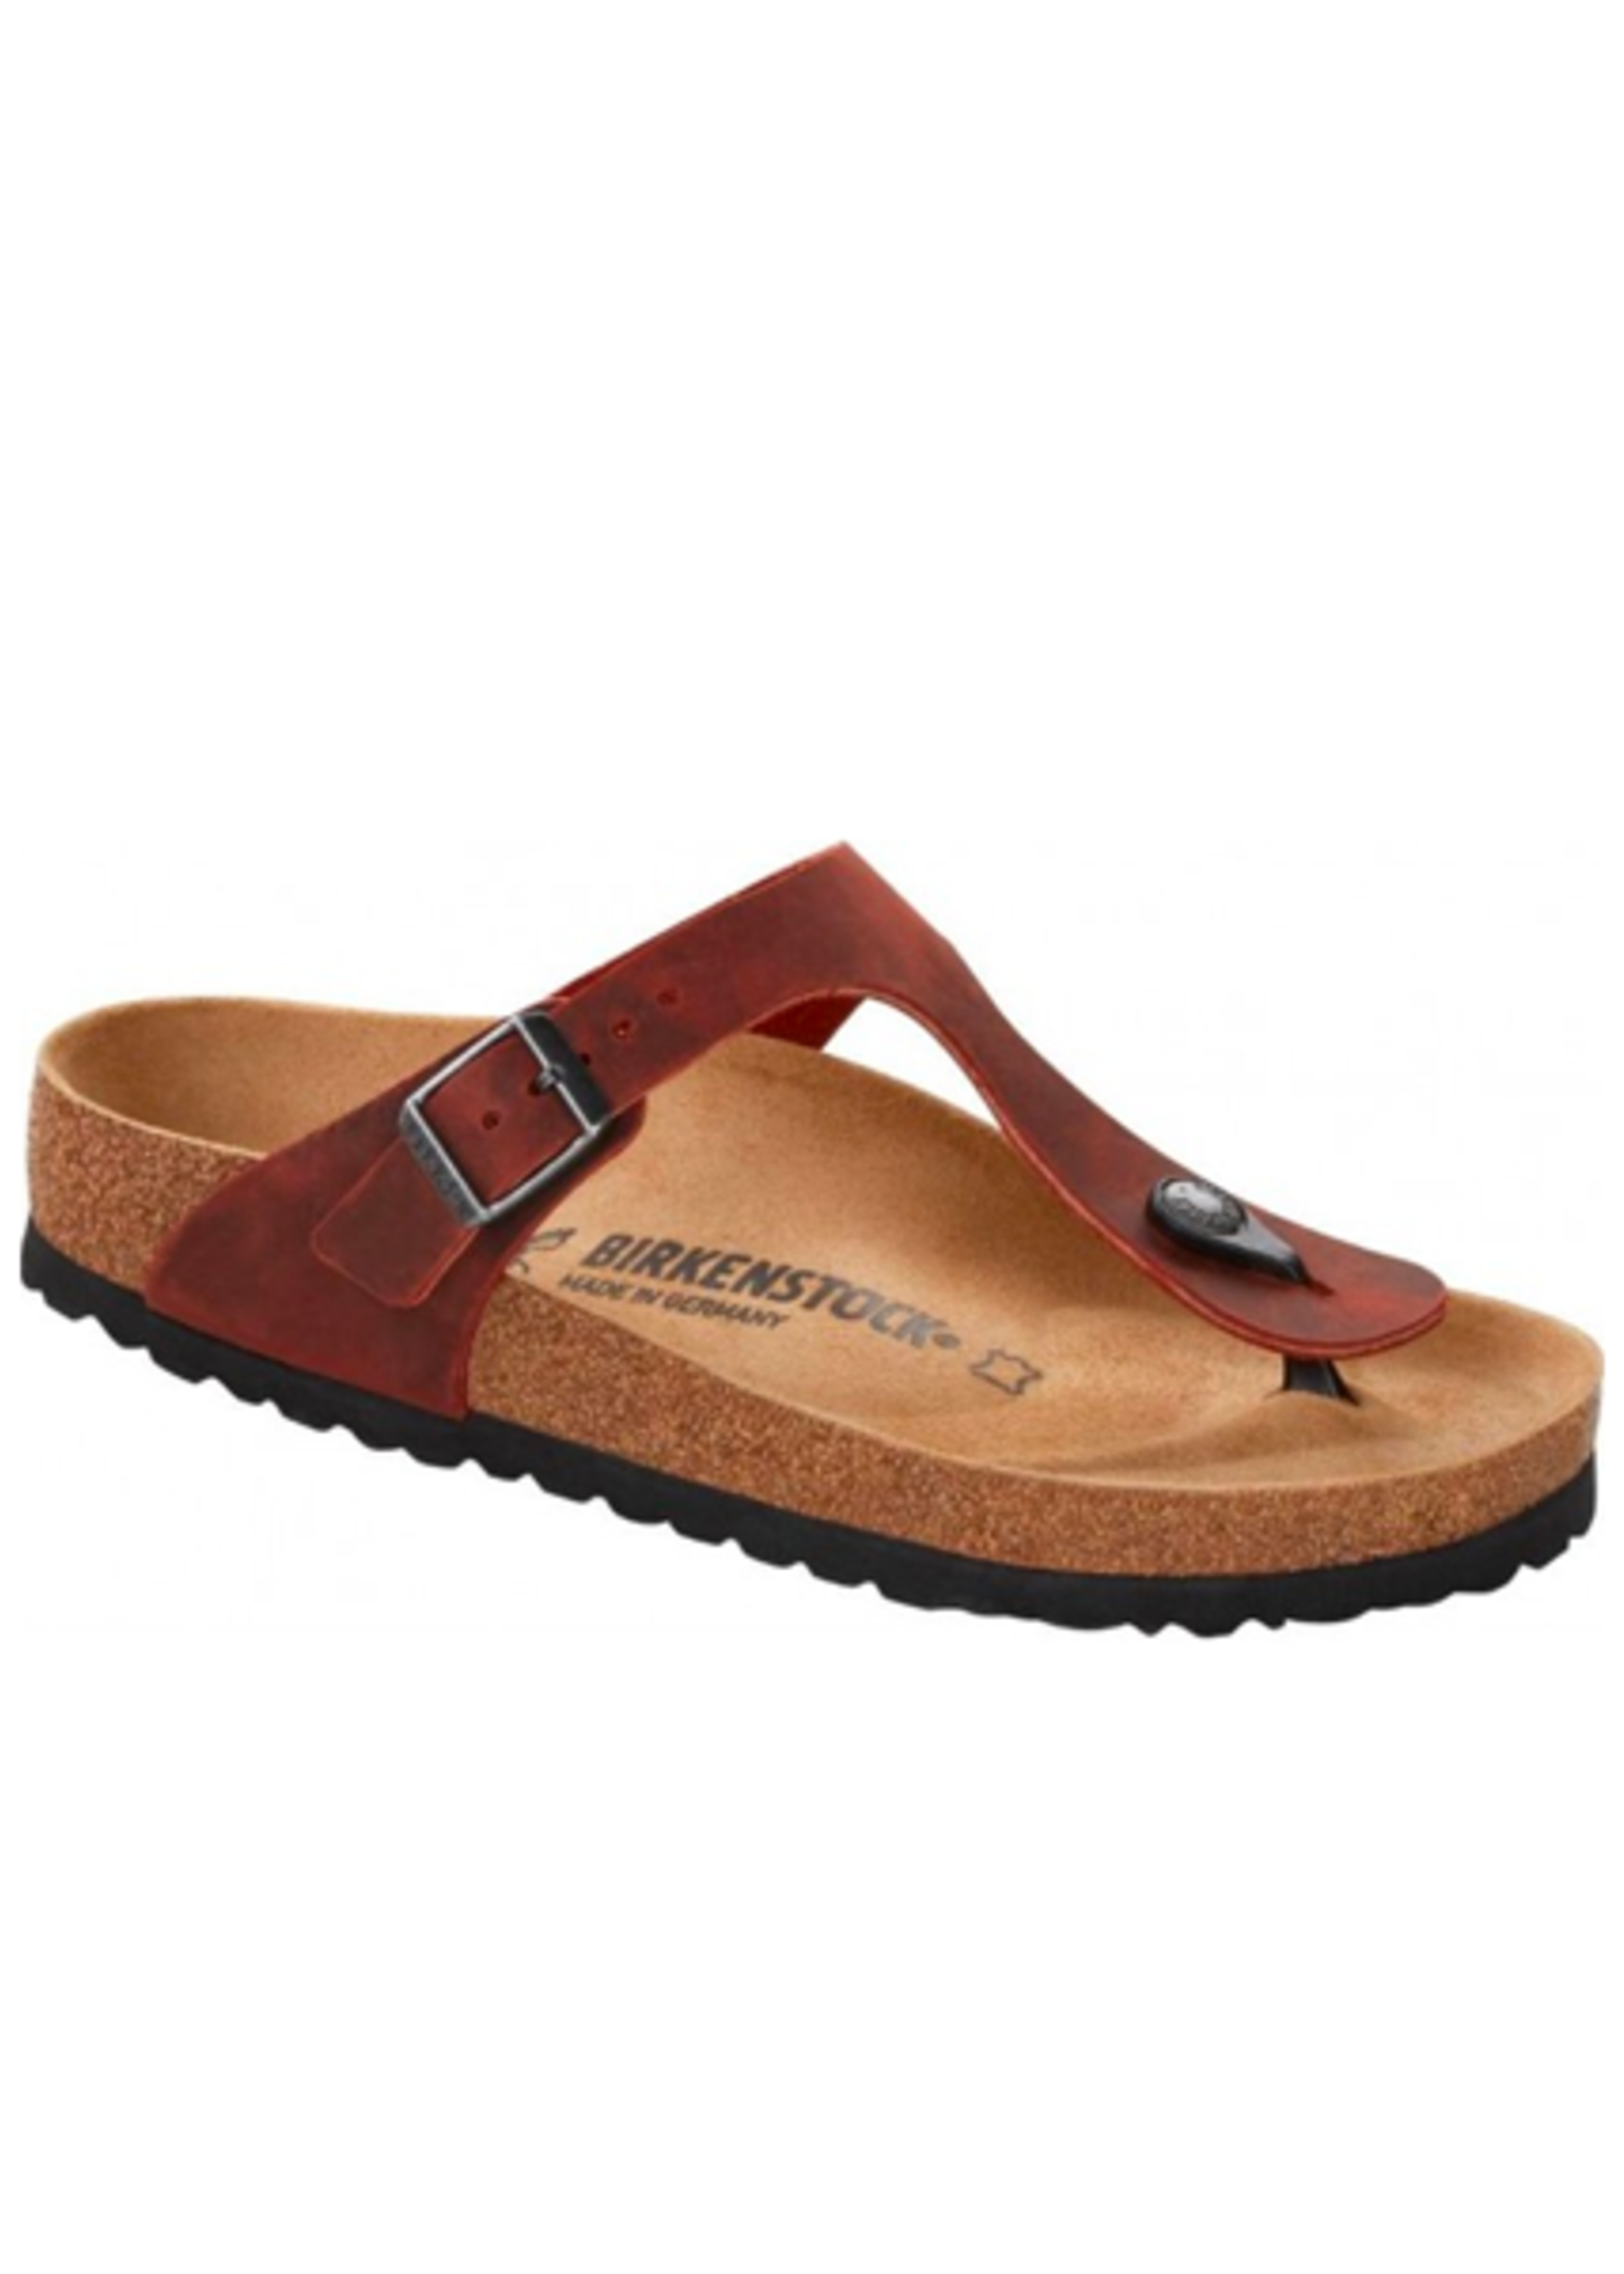 Birkenstock Gizeh -  NU Oiled Leather in Earth Red (Classic Footbed - Suede Lined)